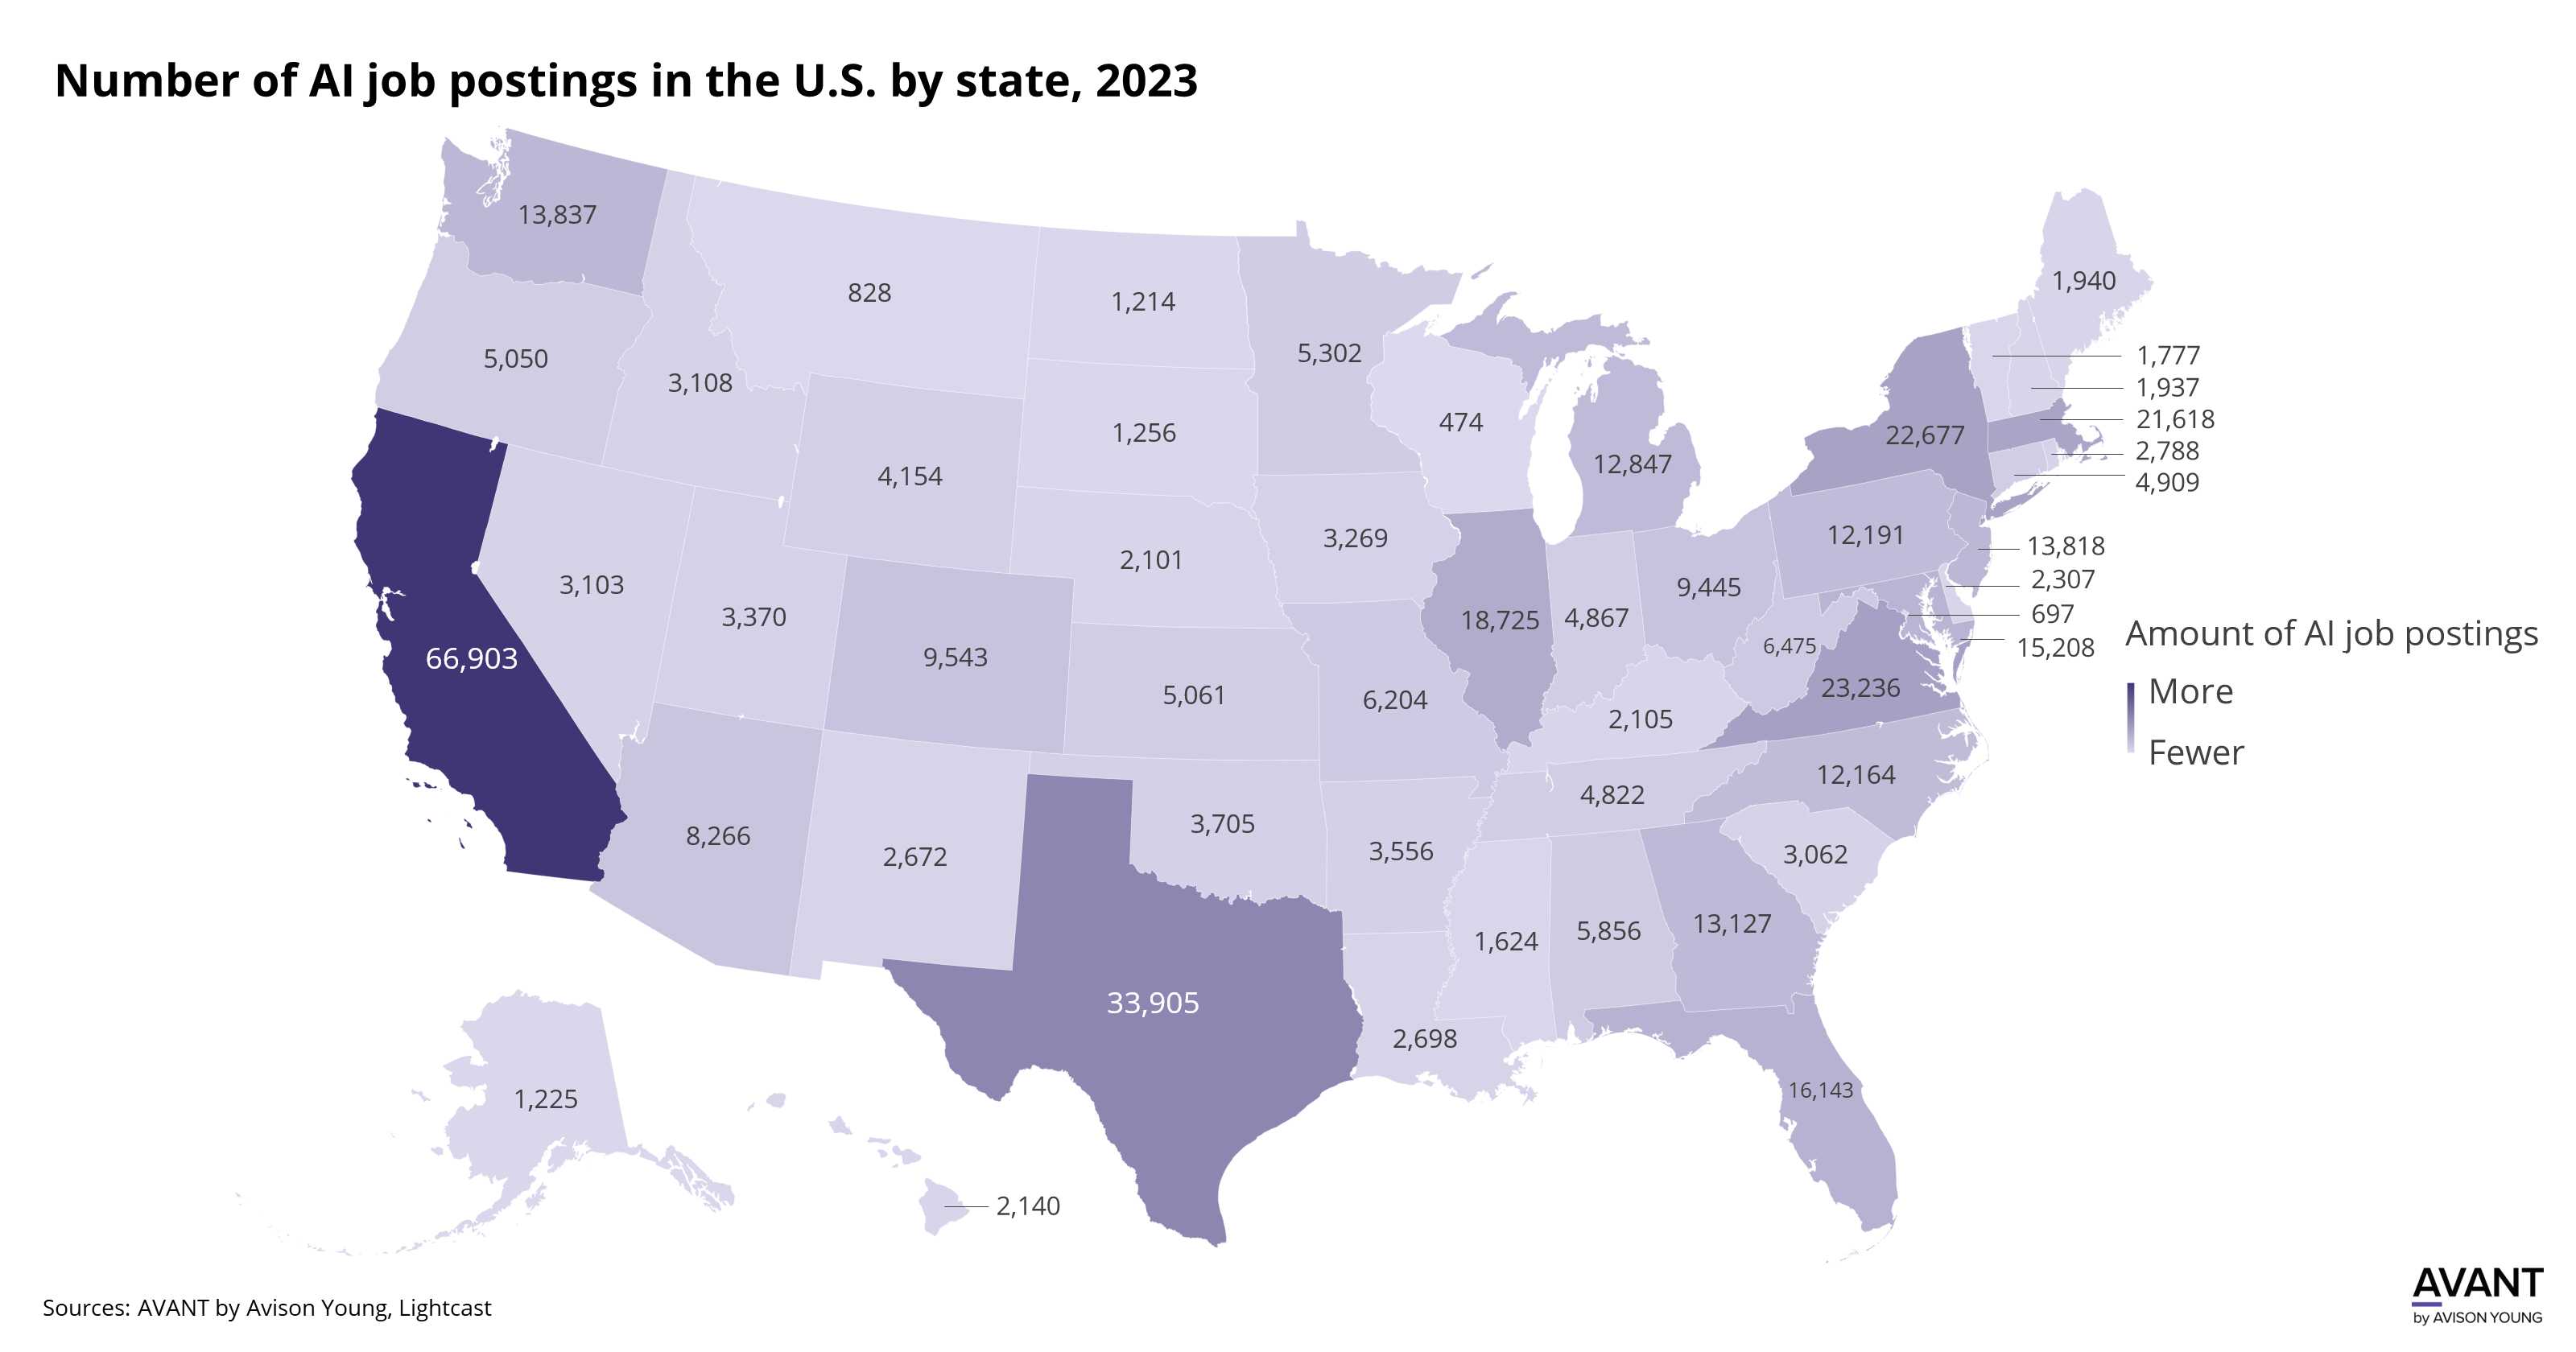 map of number of AI job postings in the U.S. by state in 2023